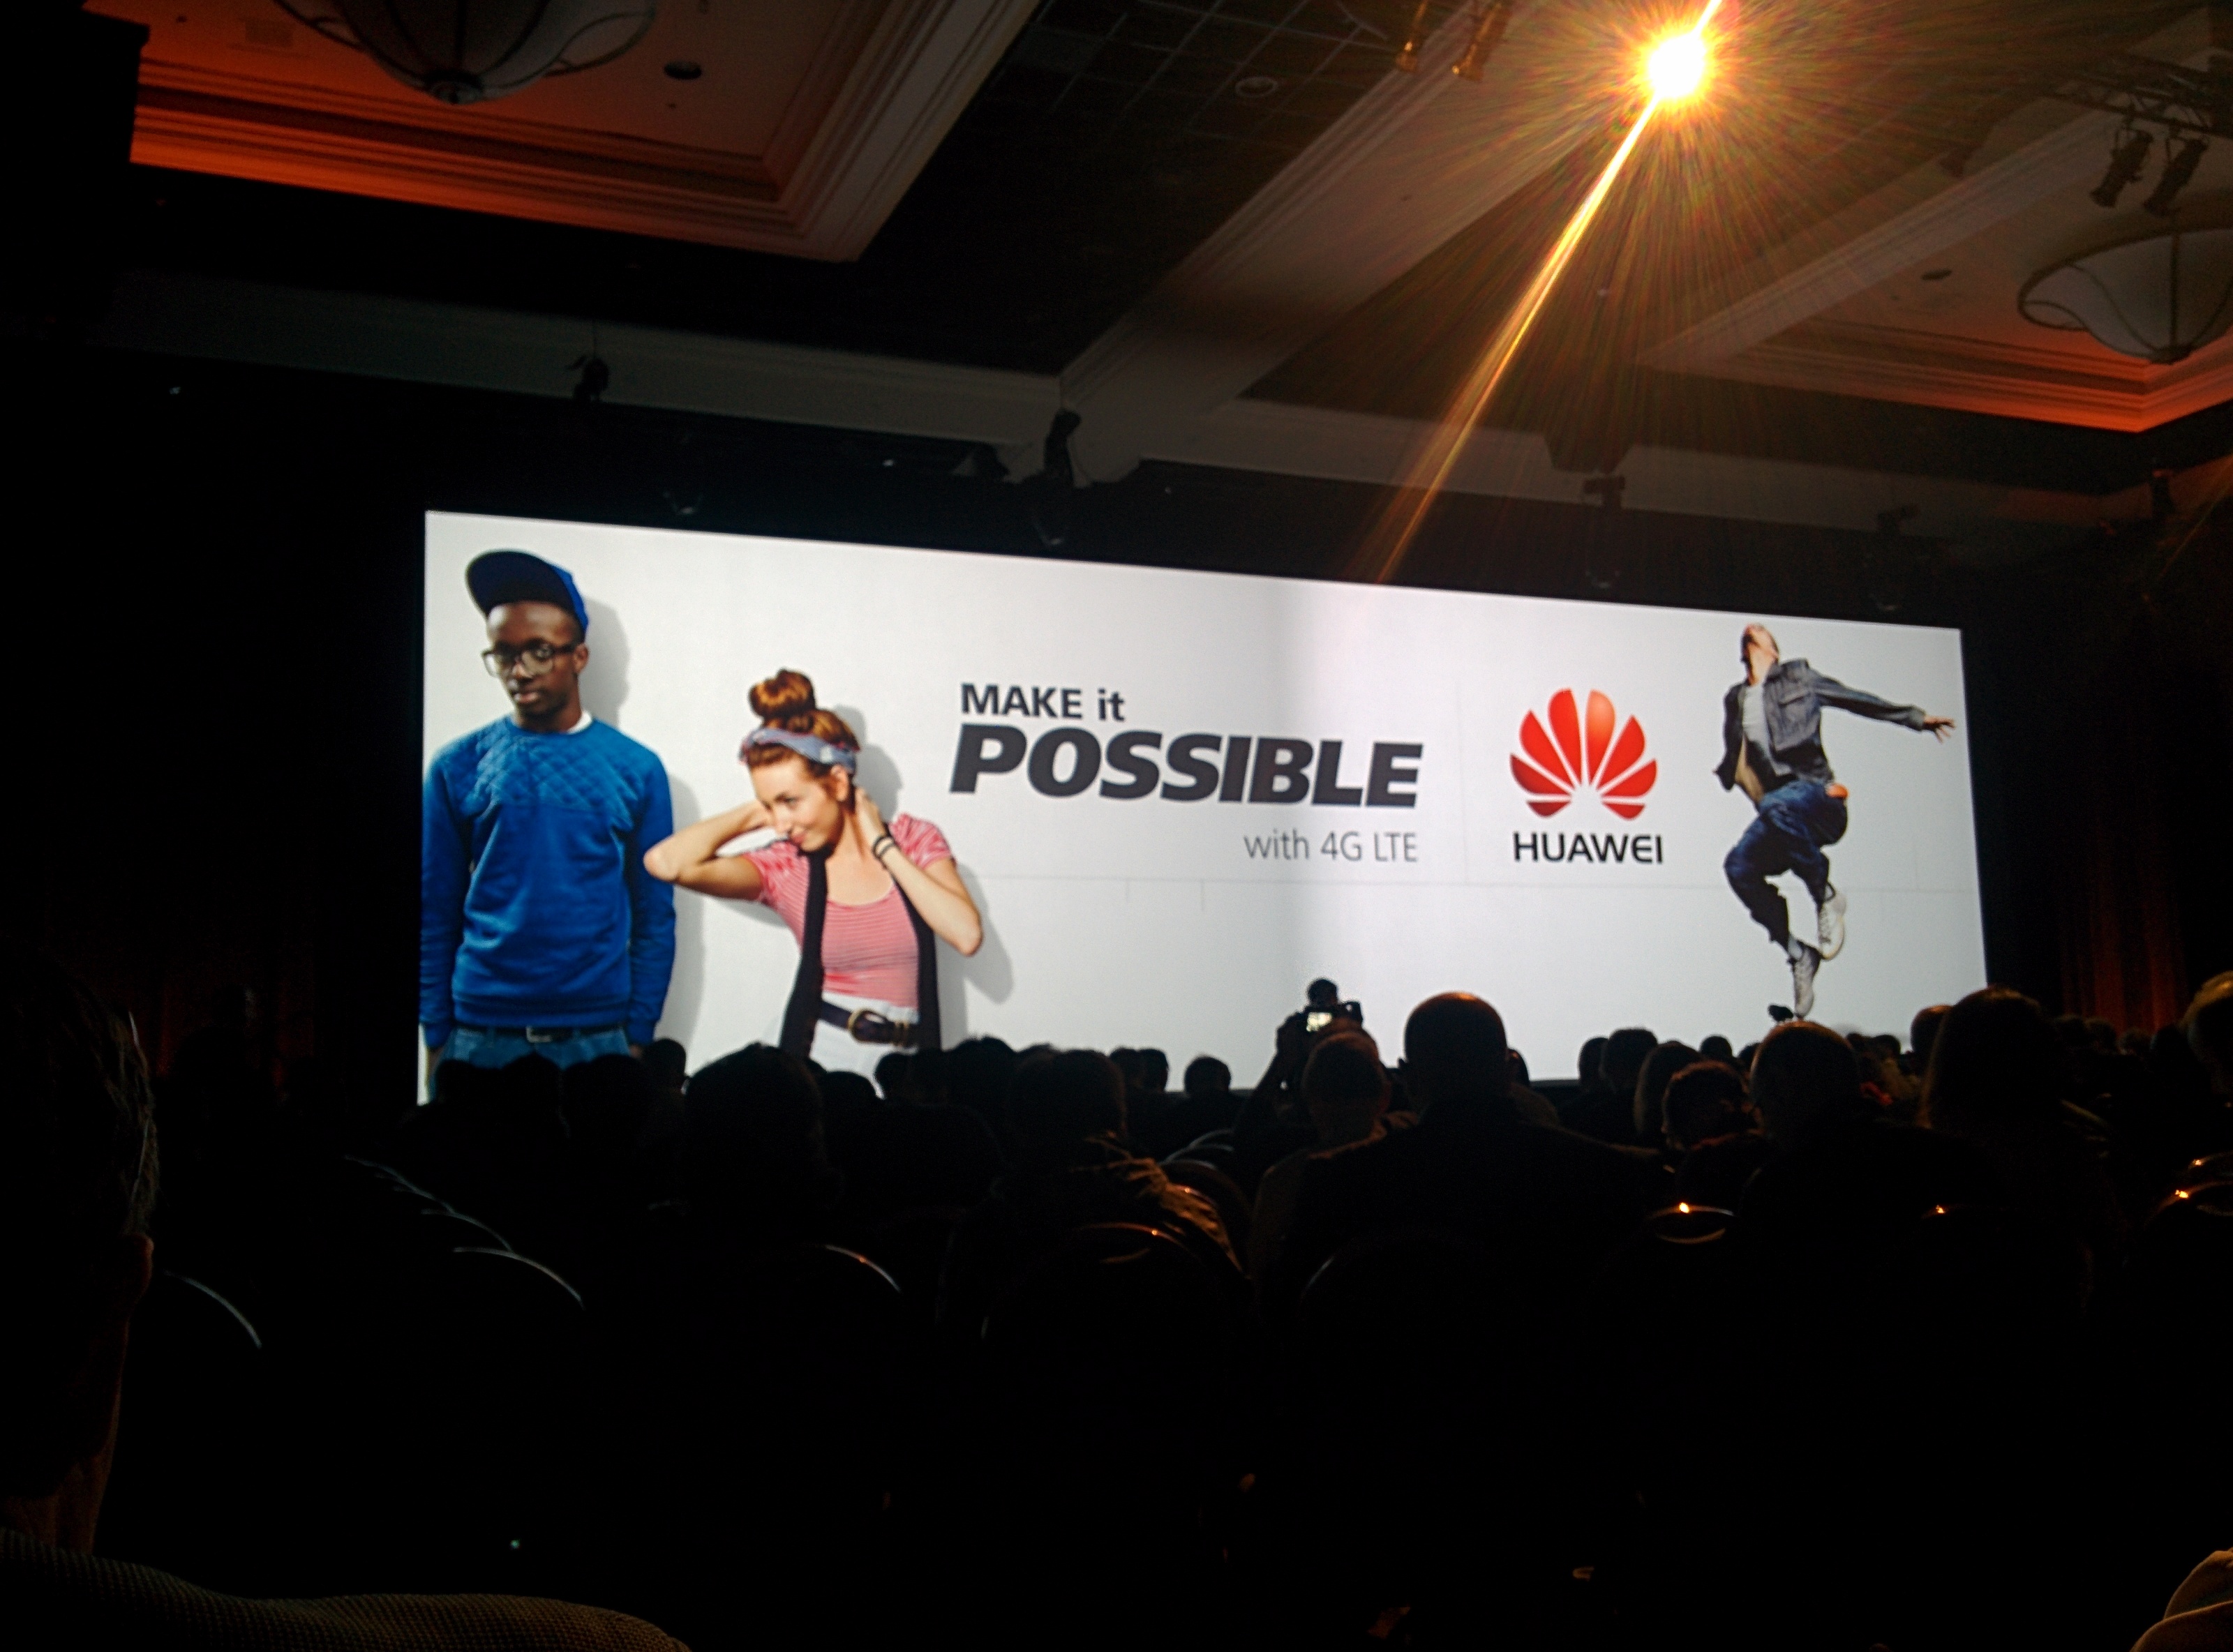 Huawei press conference - for some reason we don't have an alt tag here